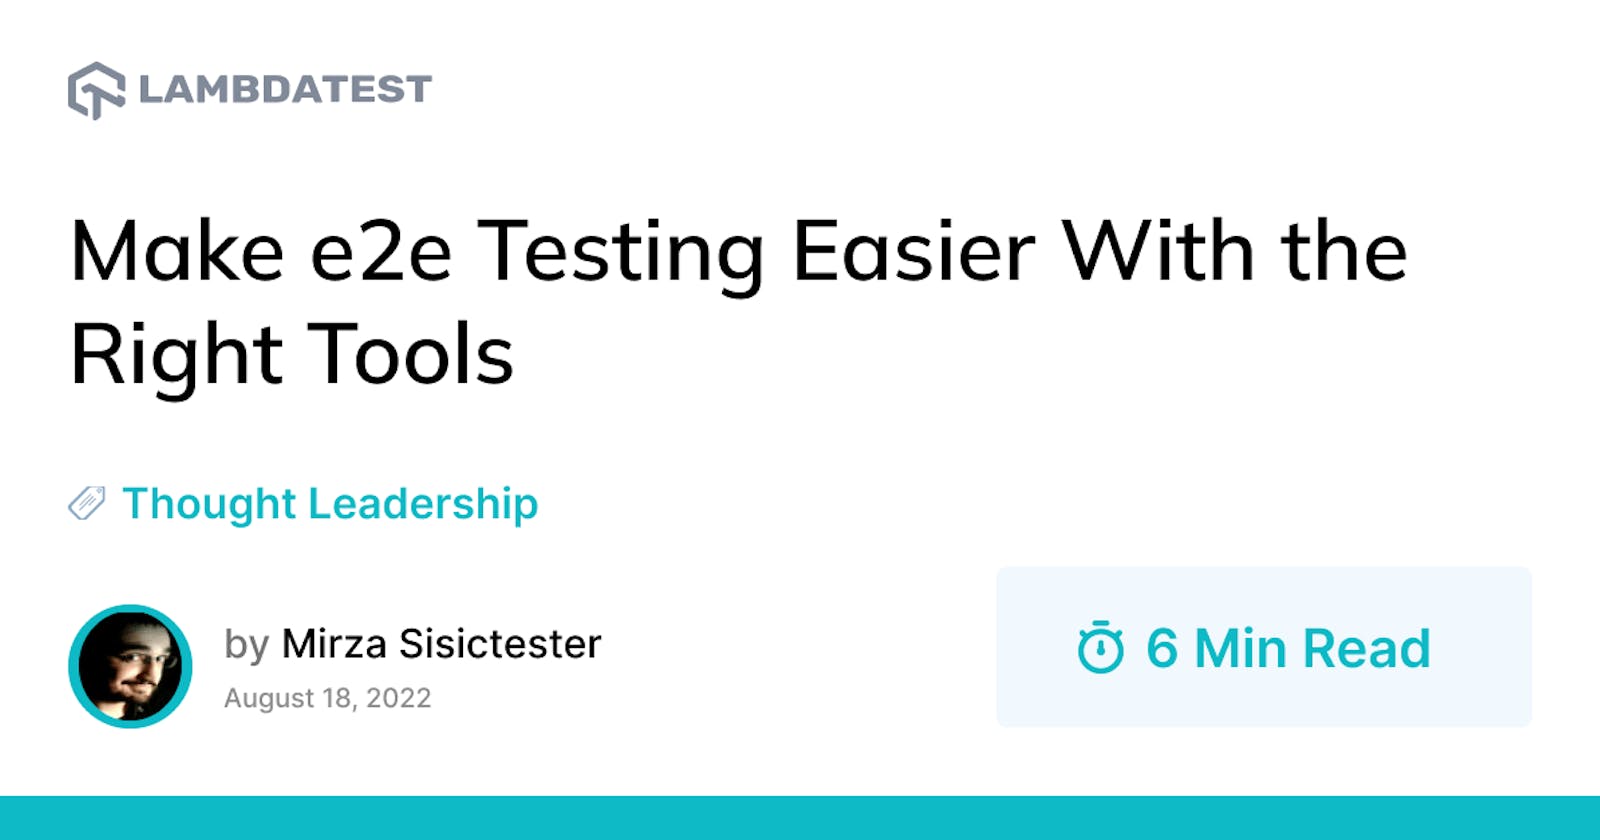 Make e2e Testing Easier With the Right Tools